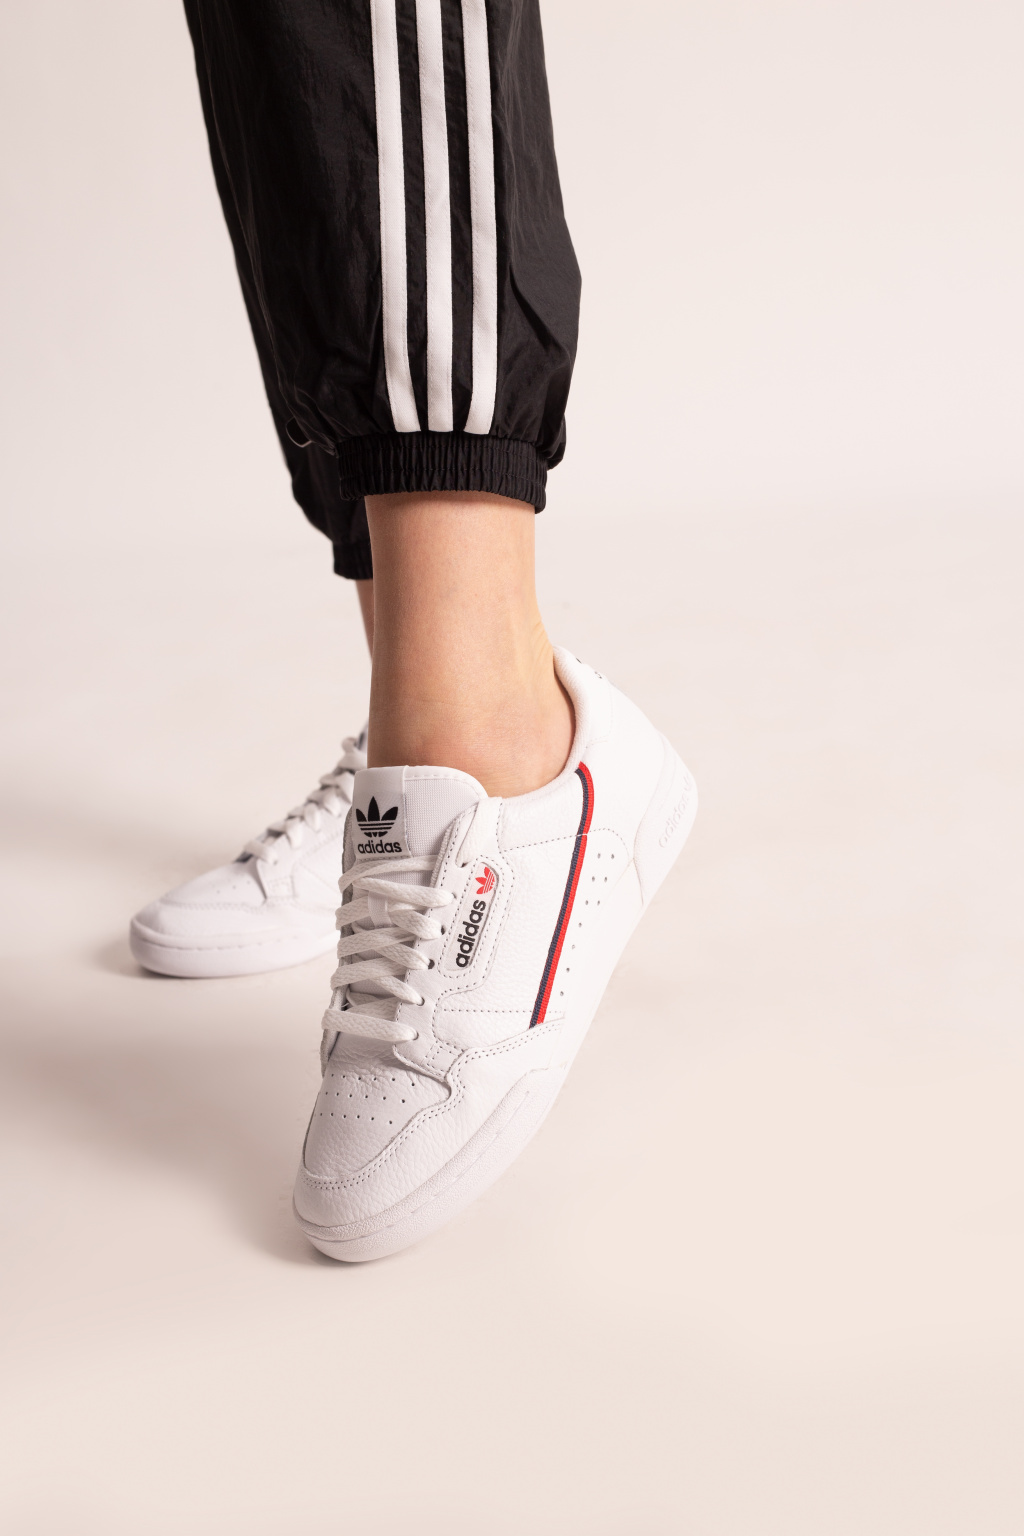 adidas Performance 1457 Women's Shoes | ADIDAS Originals 'Continental sneakers